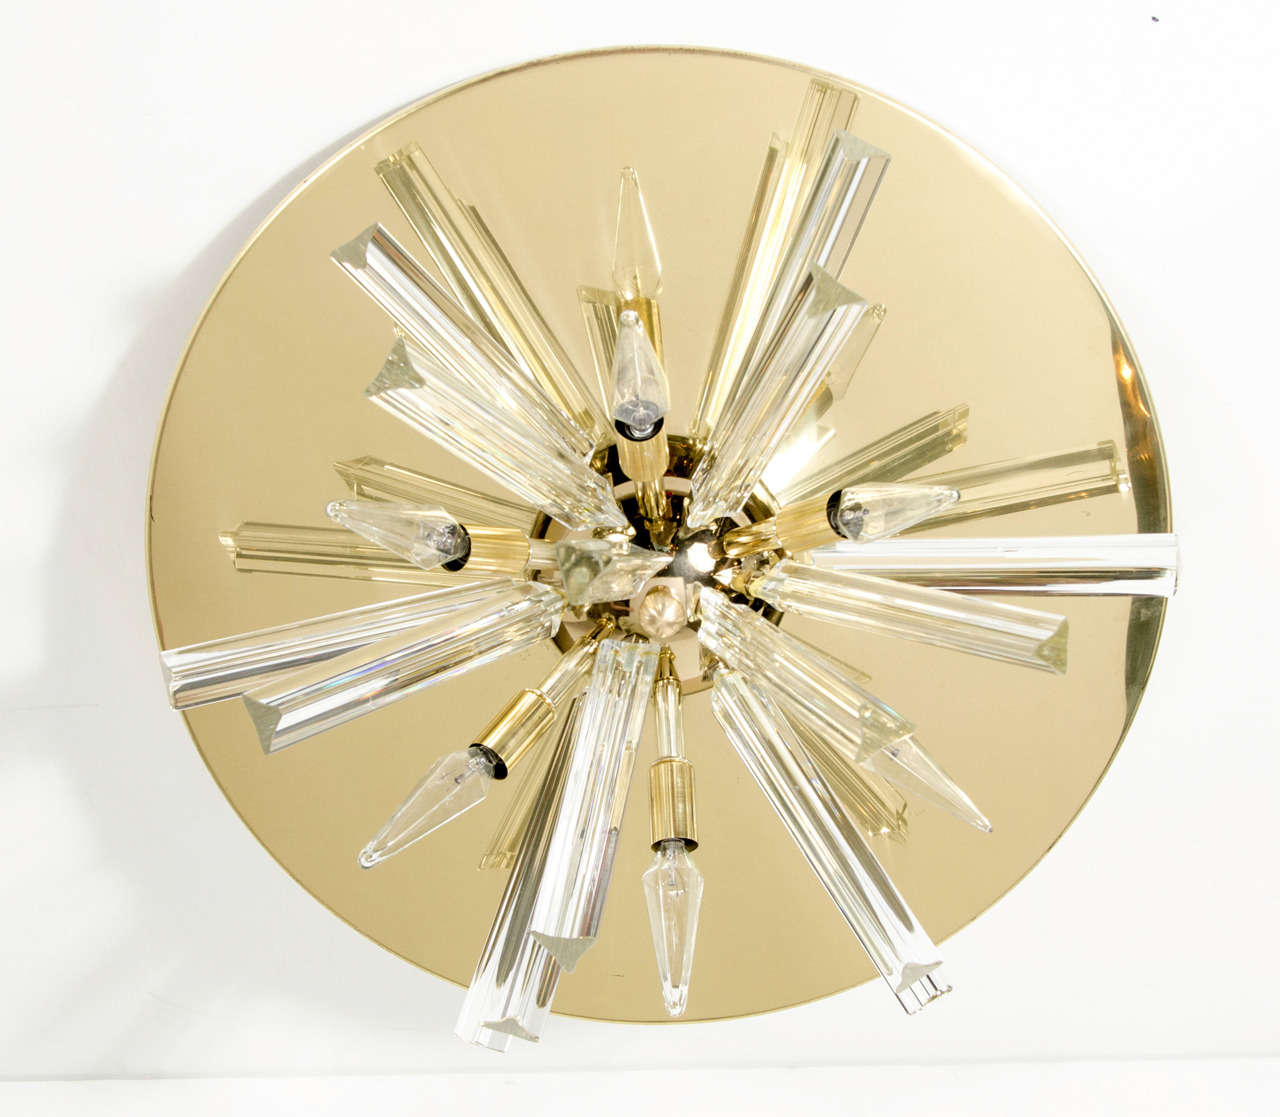 This stunning Mid-Century Modernist flush mount chandelier has Murano glass triedre crystals and lights emanating from a central dome on a polished brass base plate. A real eye catching piece, bound to look fantastic where ever it is used!
Newly